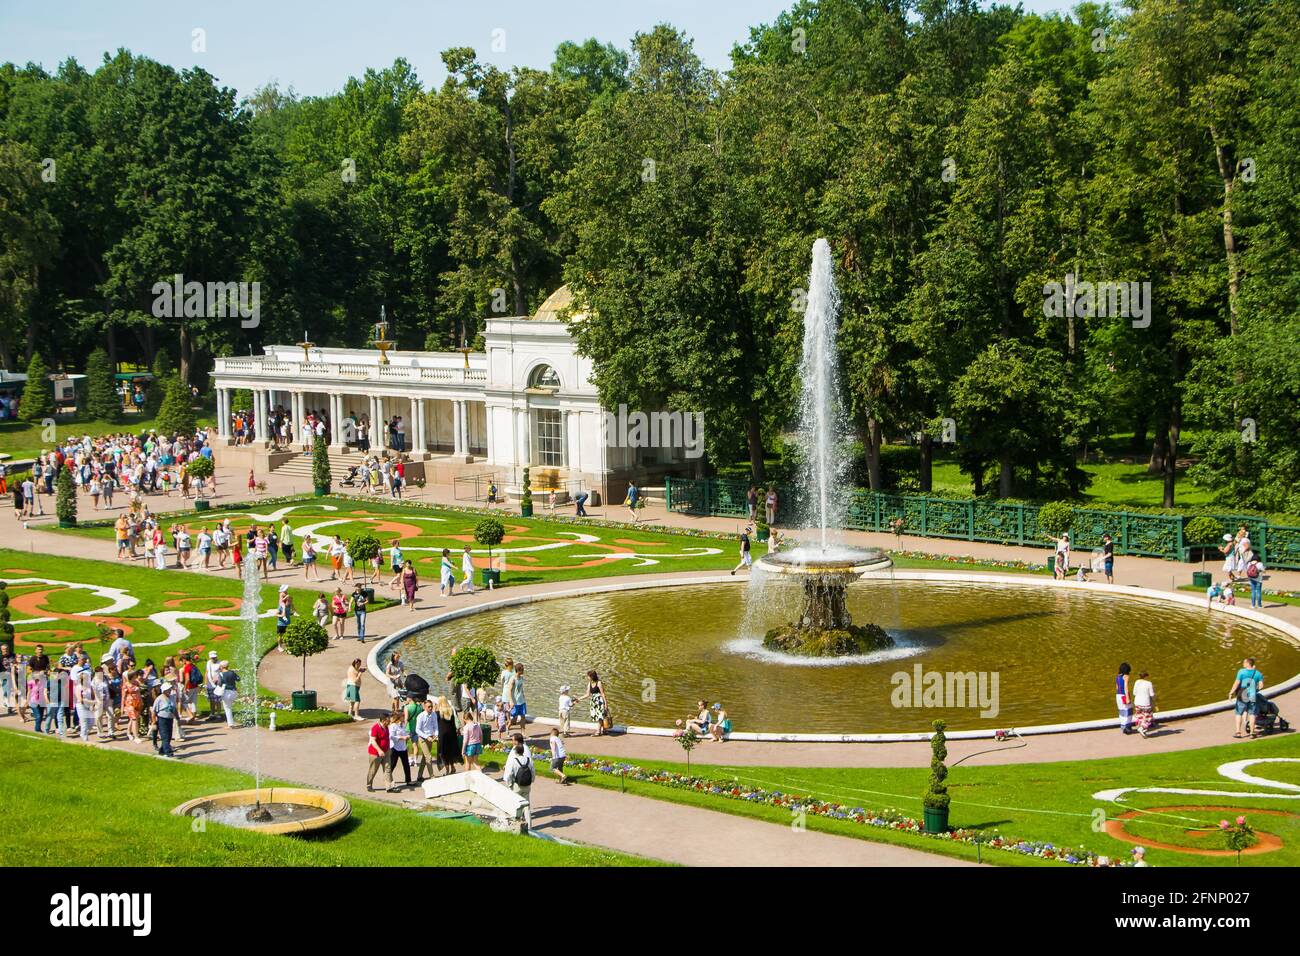 Peterhof, Russia: July 16, 2016 - the palace park. Celebration of the opening of fountains. Tourists visiting the landmark of St. Petersburg. Stock Photo